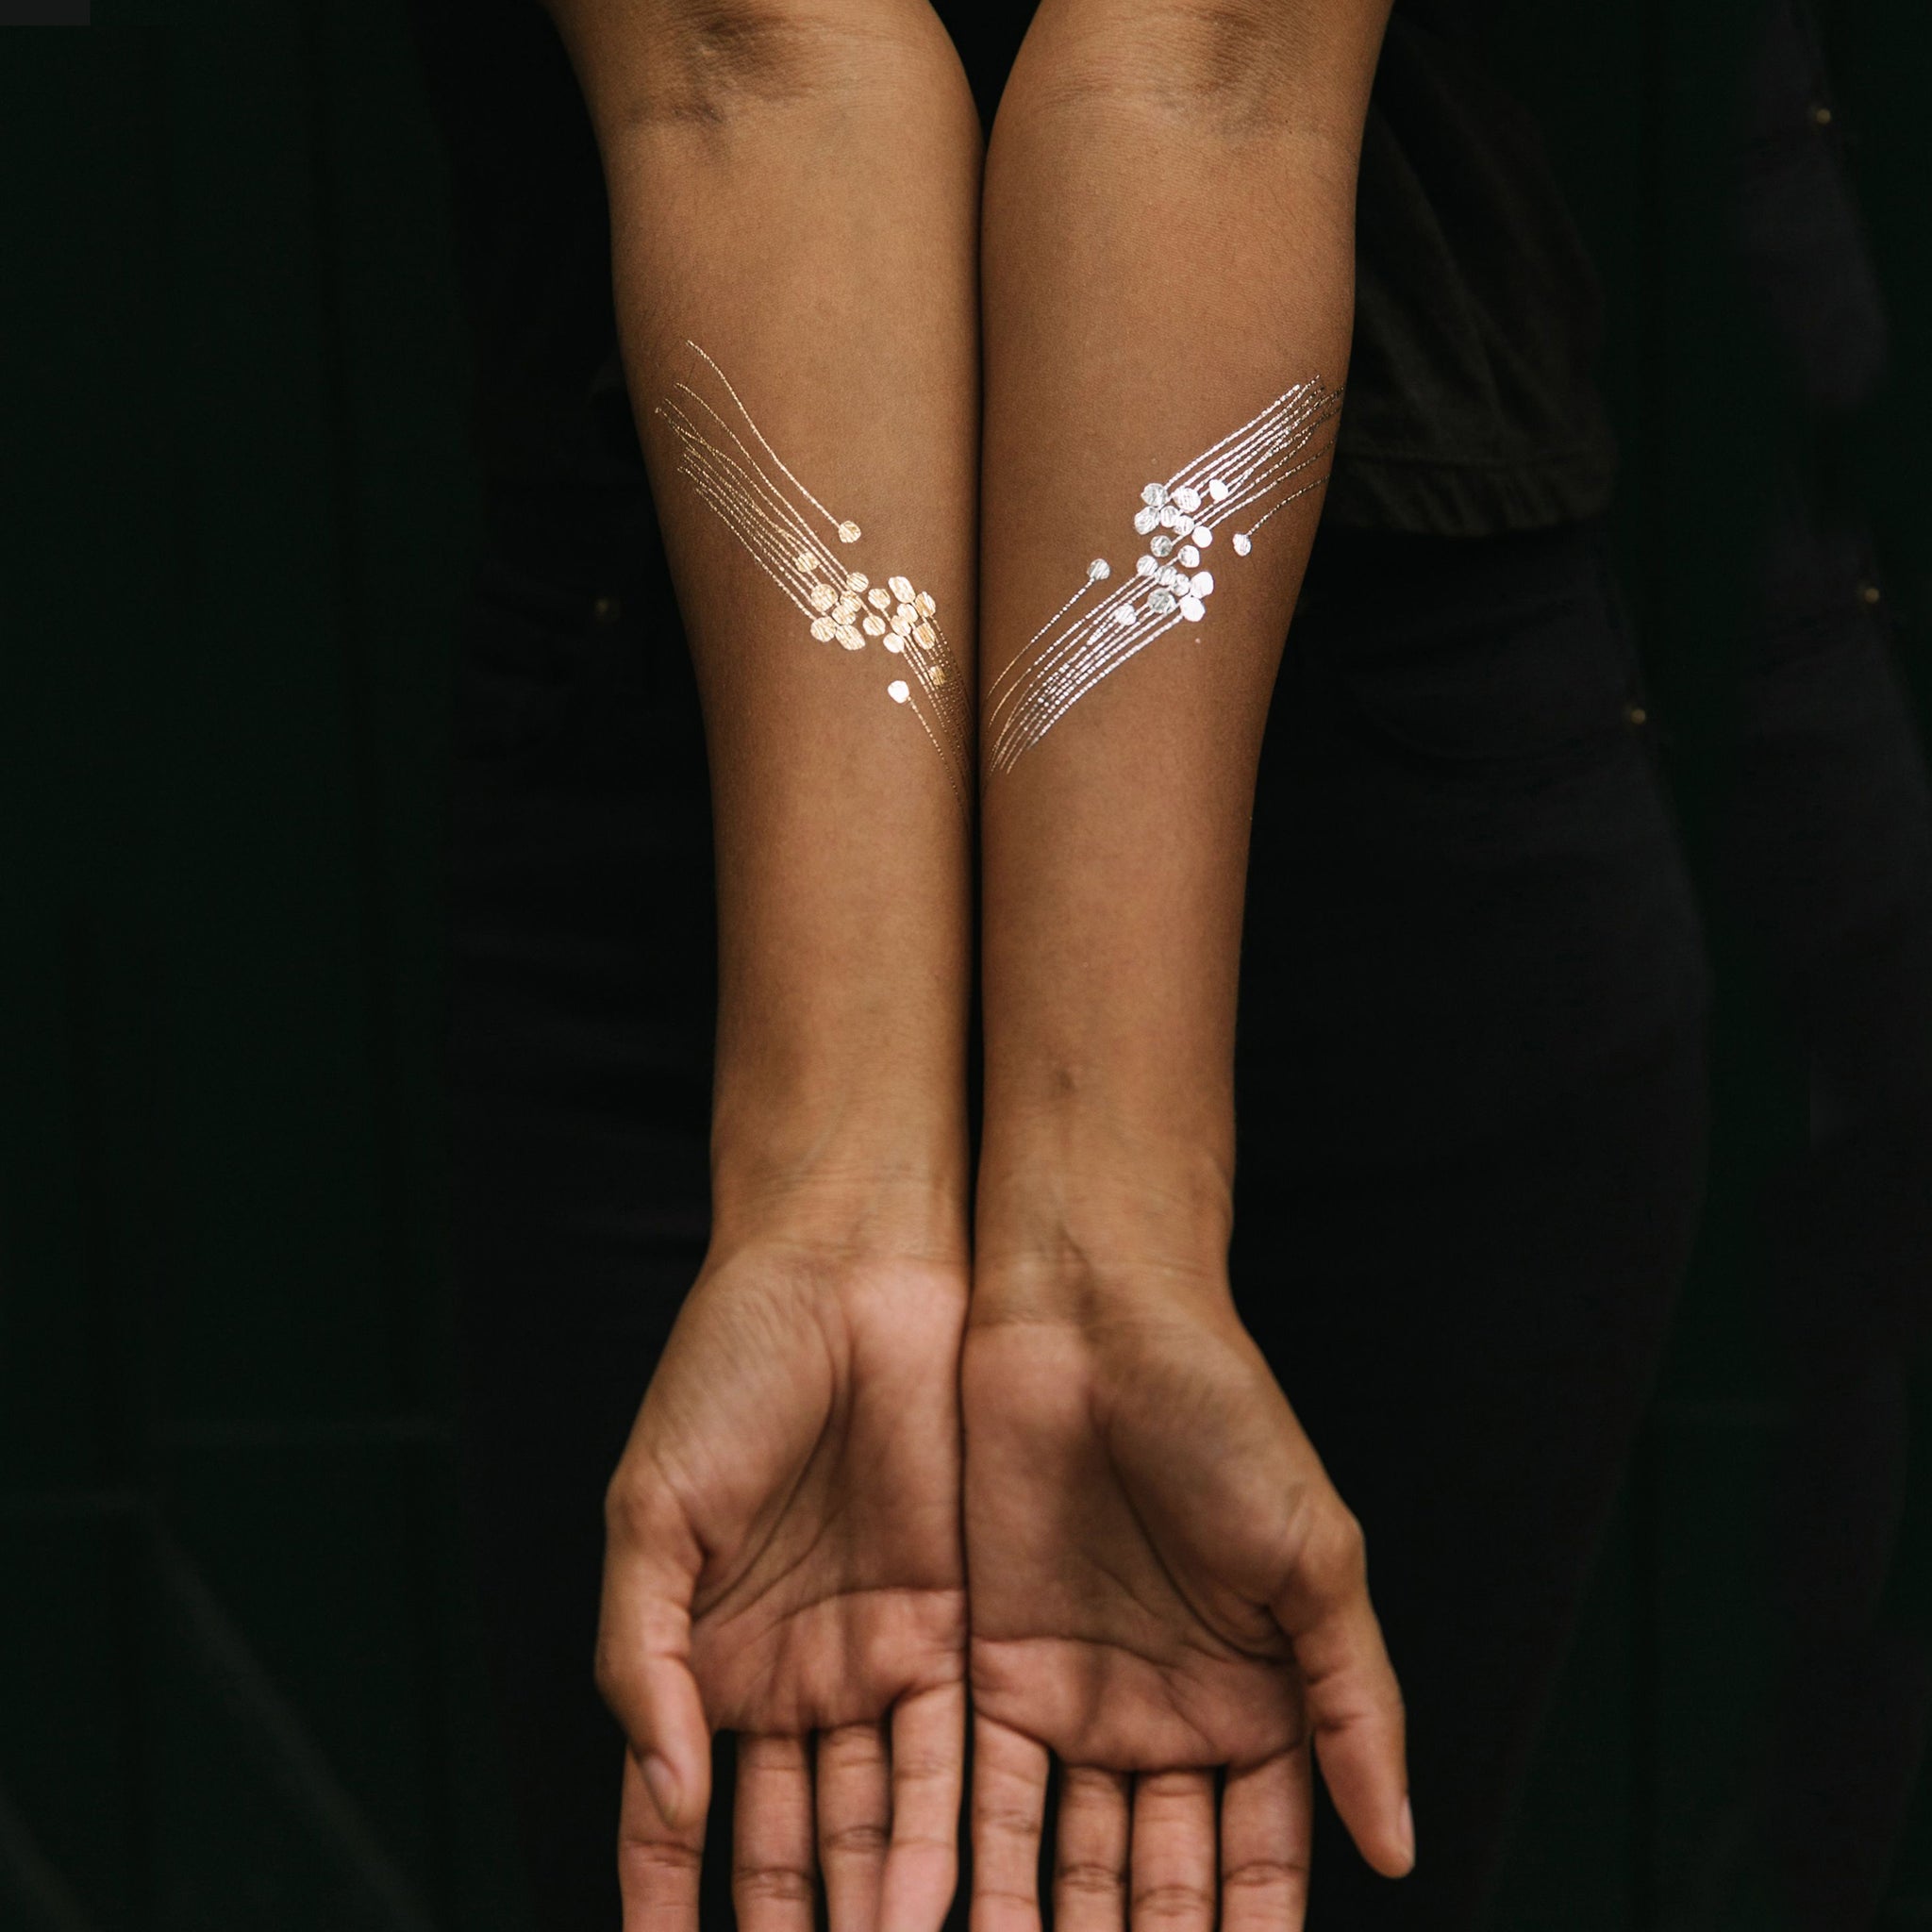 Amazing Metallic Temporary Tattoo - Gold, Silver And More!